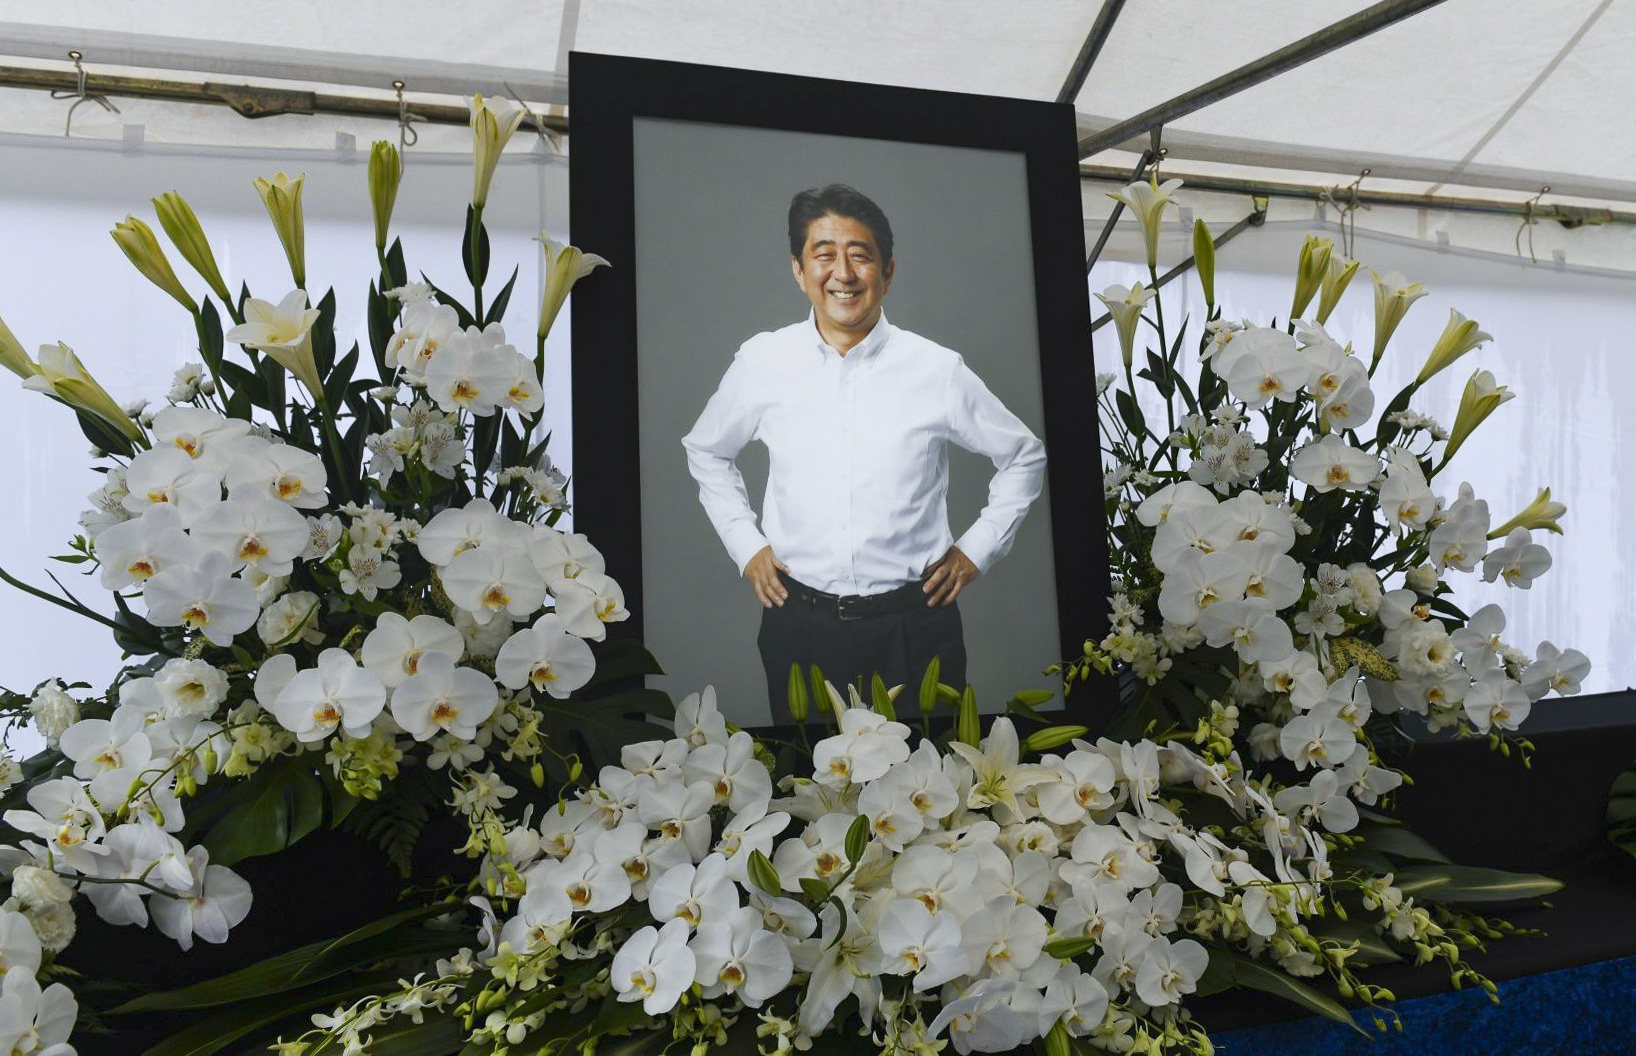 A photograph of former Prime Minister Shinzo Abe at a makeshift memorial at Zojoji temple in Tokyo, Japan, on Tuesday, July 12, 2022. A private funeral was held Tuesday for Abe, whose assassination last week shocked a nation and brought renewed attention to his key policies such as bolstering the nation’s defenses. Photographer: Noriko Hayashi/Bloomberg